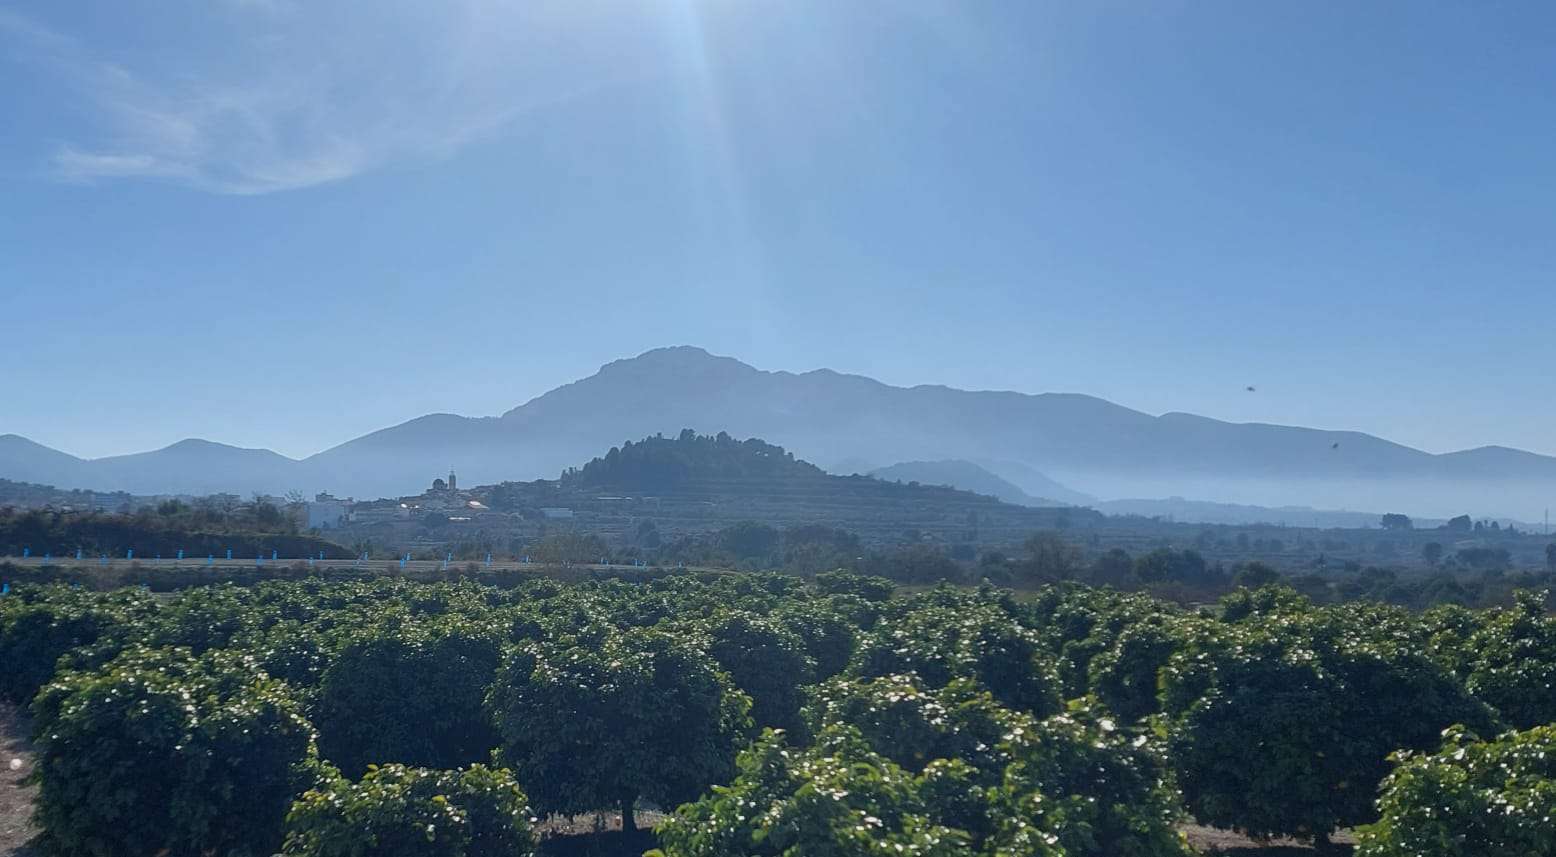 Misty view over orange groves to mountains in the distance